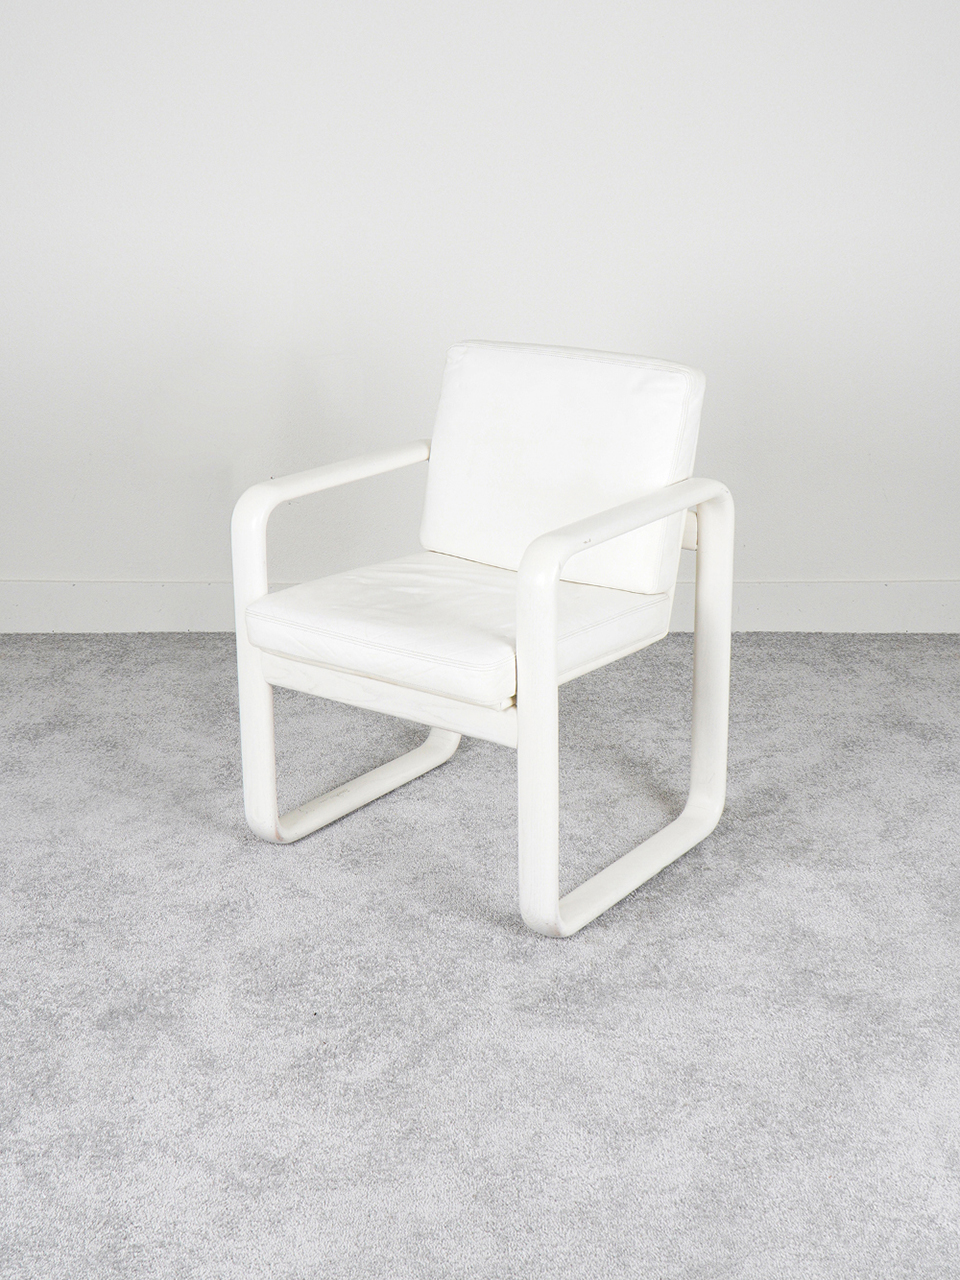 [Rosenthal] Hombre Chairs By Burkhardt Vogtherr